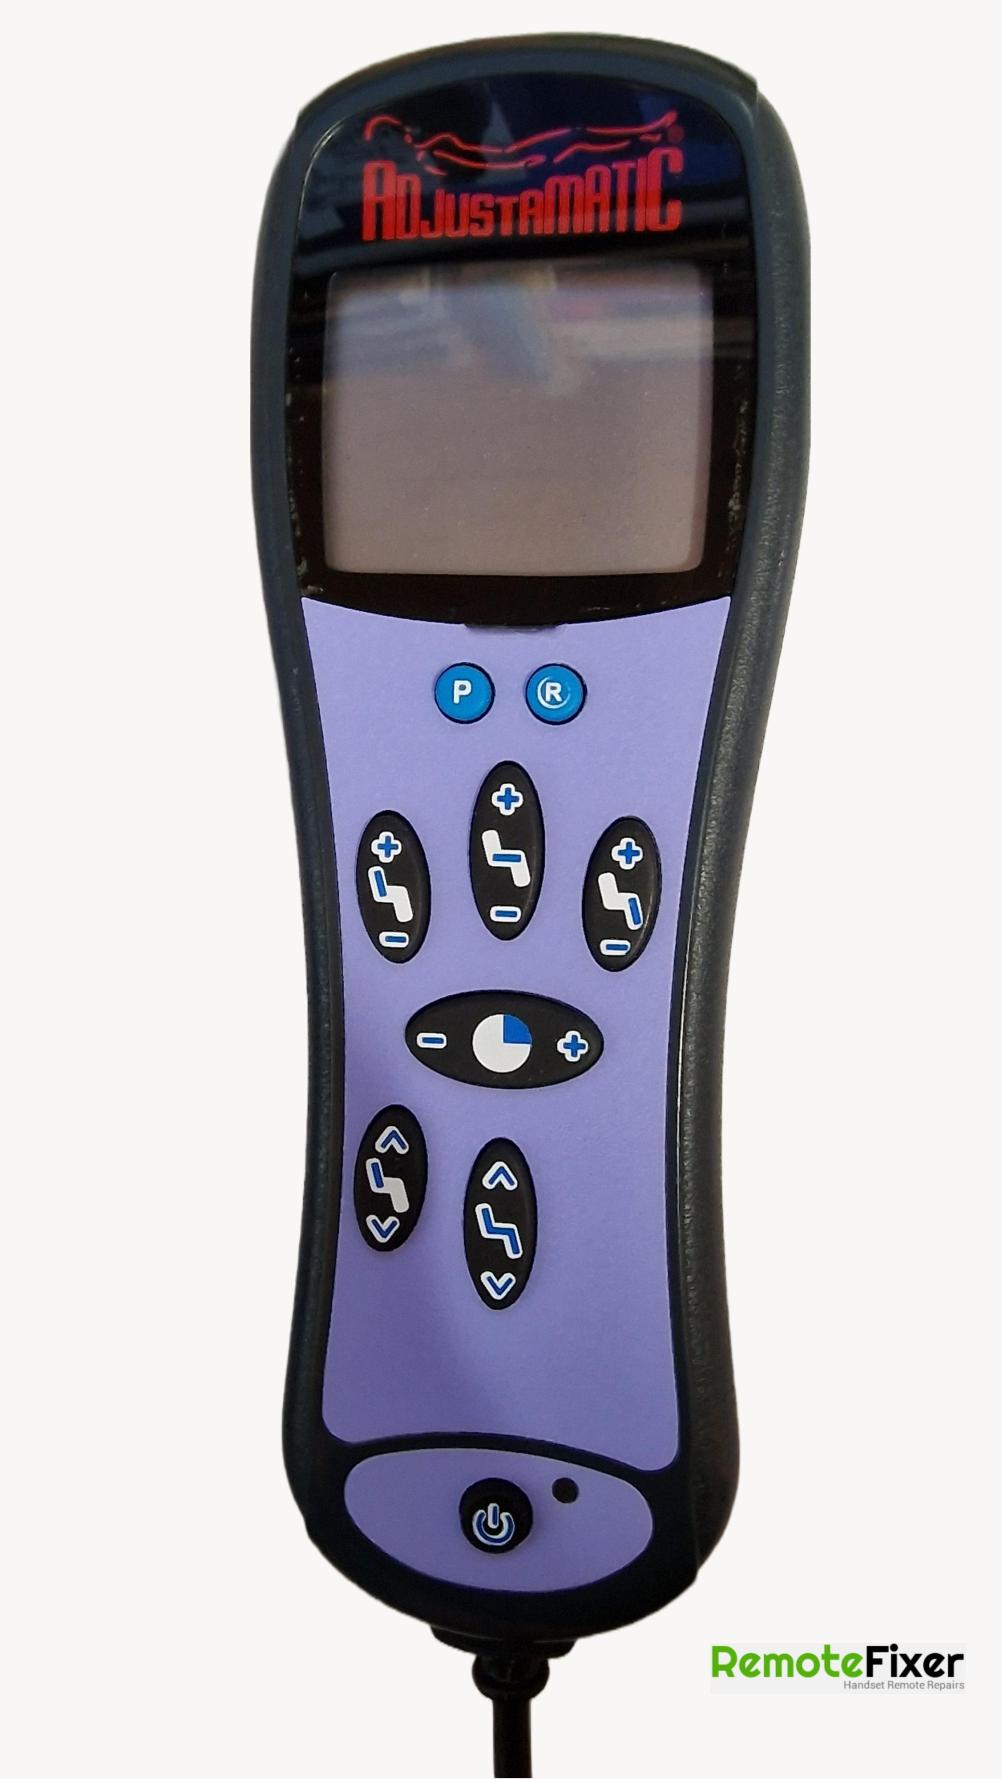 Adjustamatic Ascot chair Remote Control - Front Image